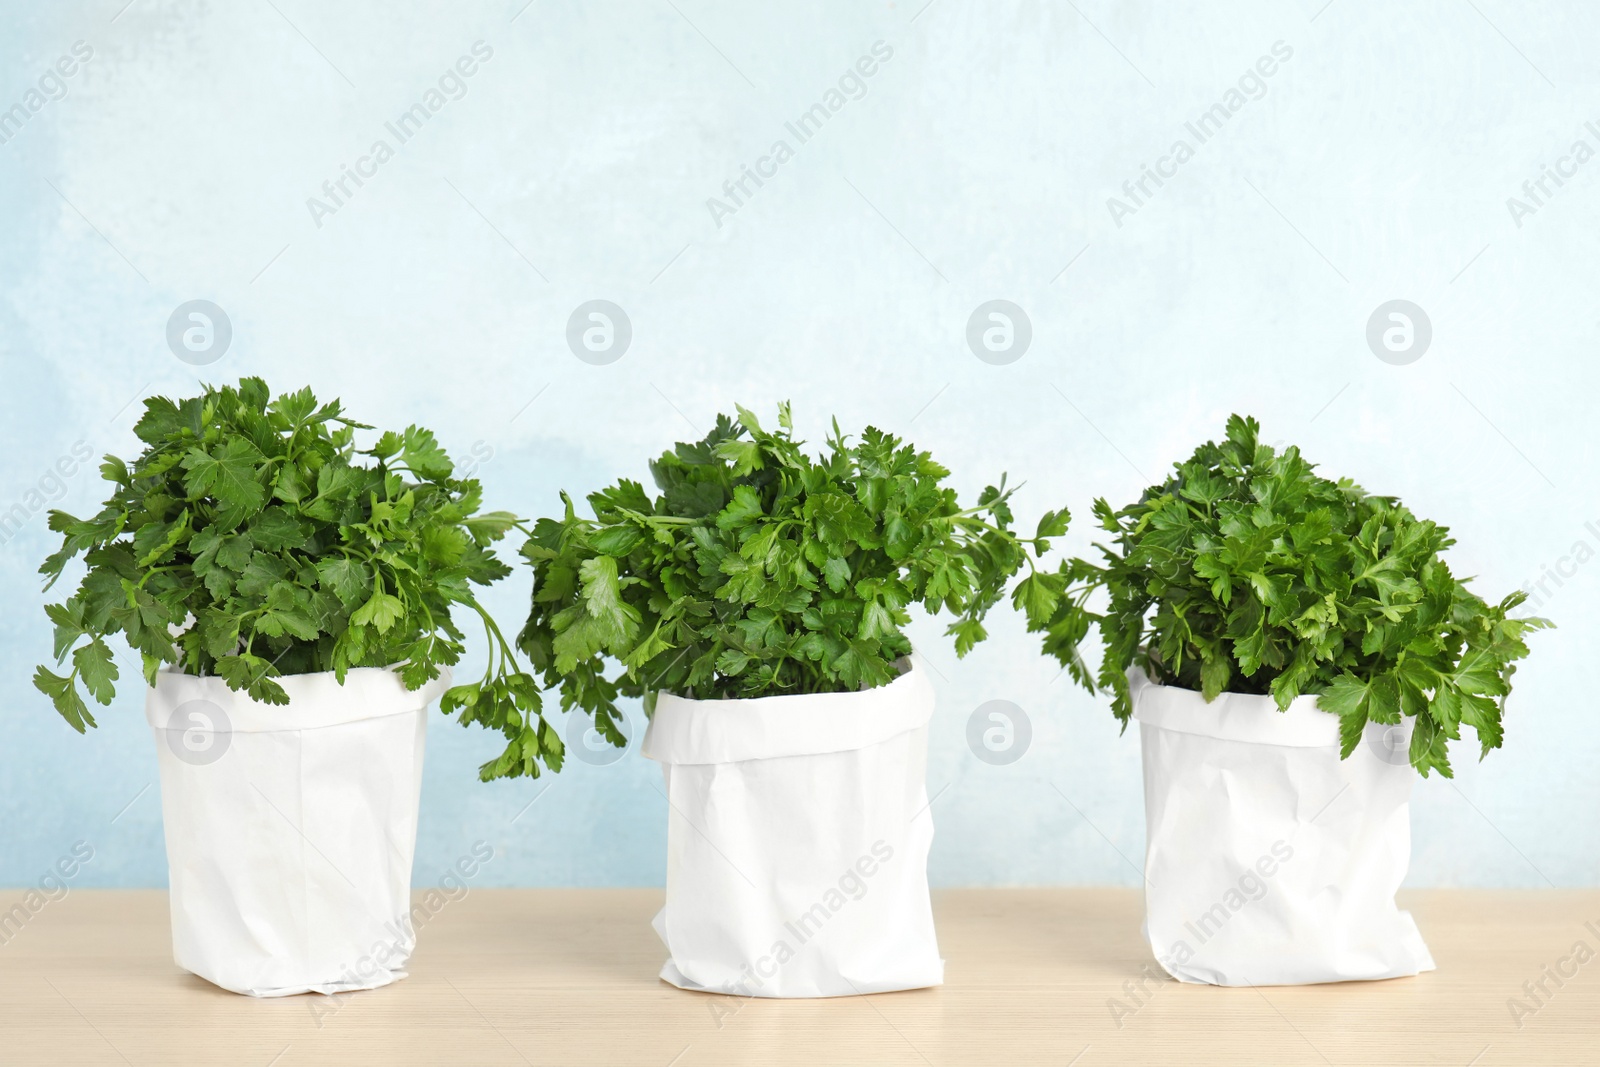 Photo of Pots with fresh green parsley on wooden table against color background. Space for text